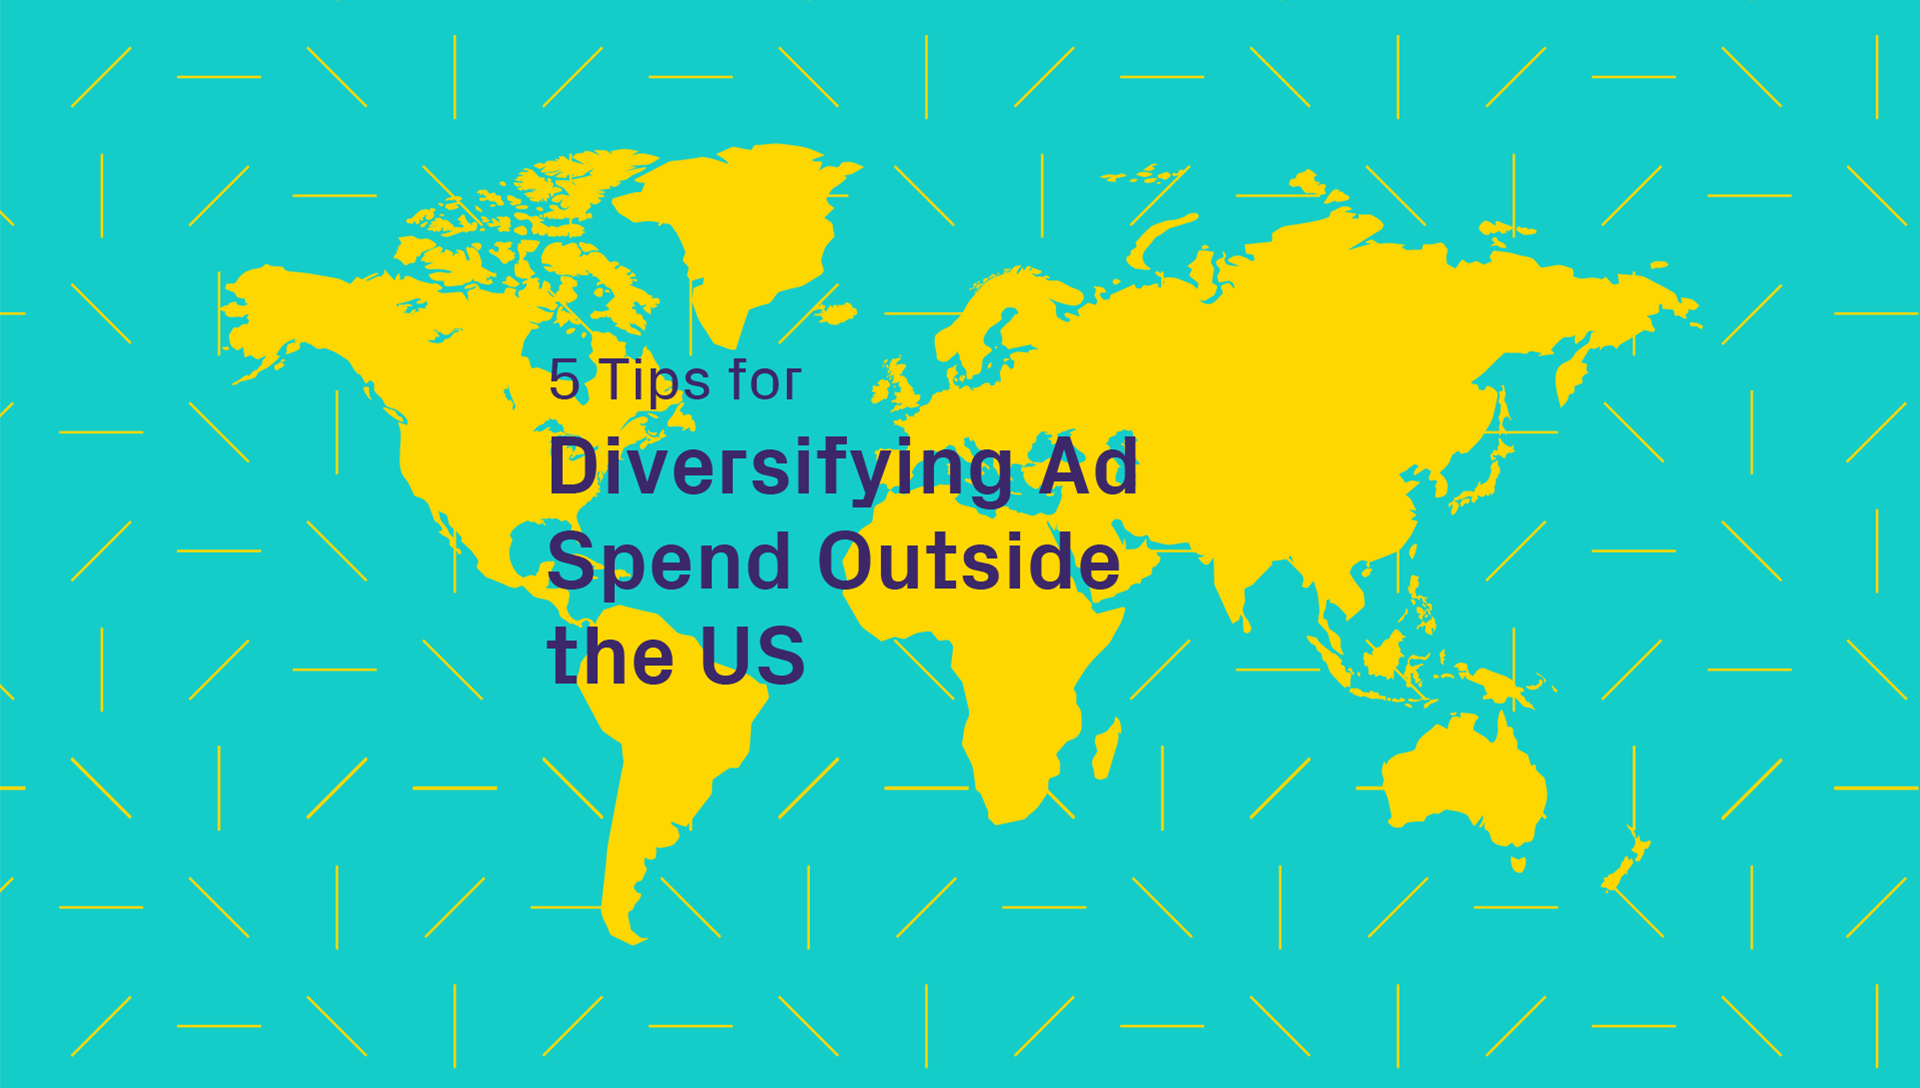 5 Tips for Diversifying Ad Spend Outside the US